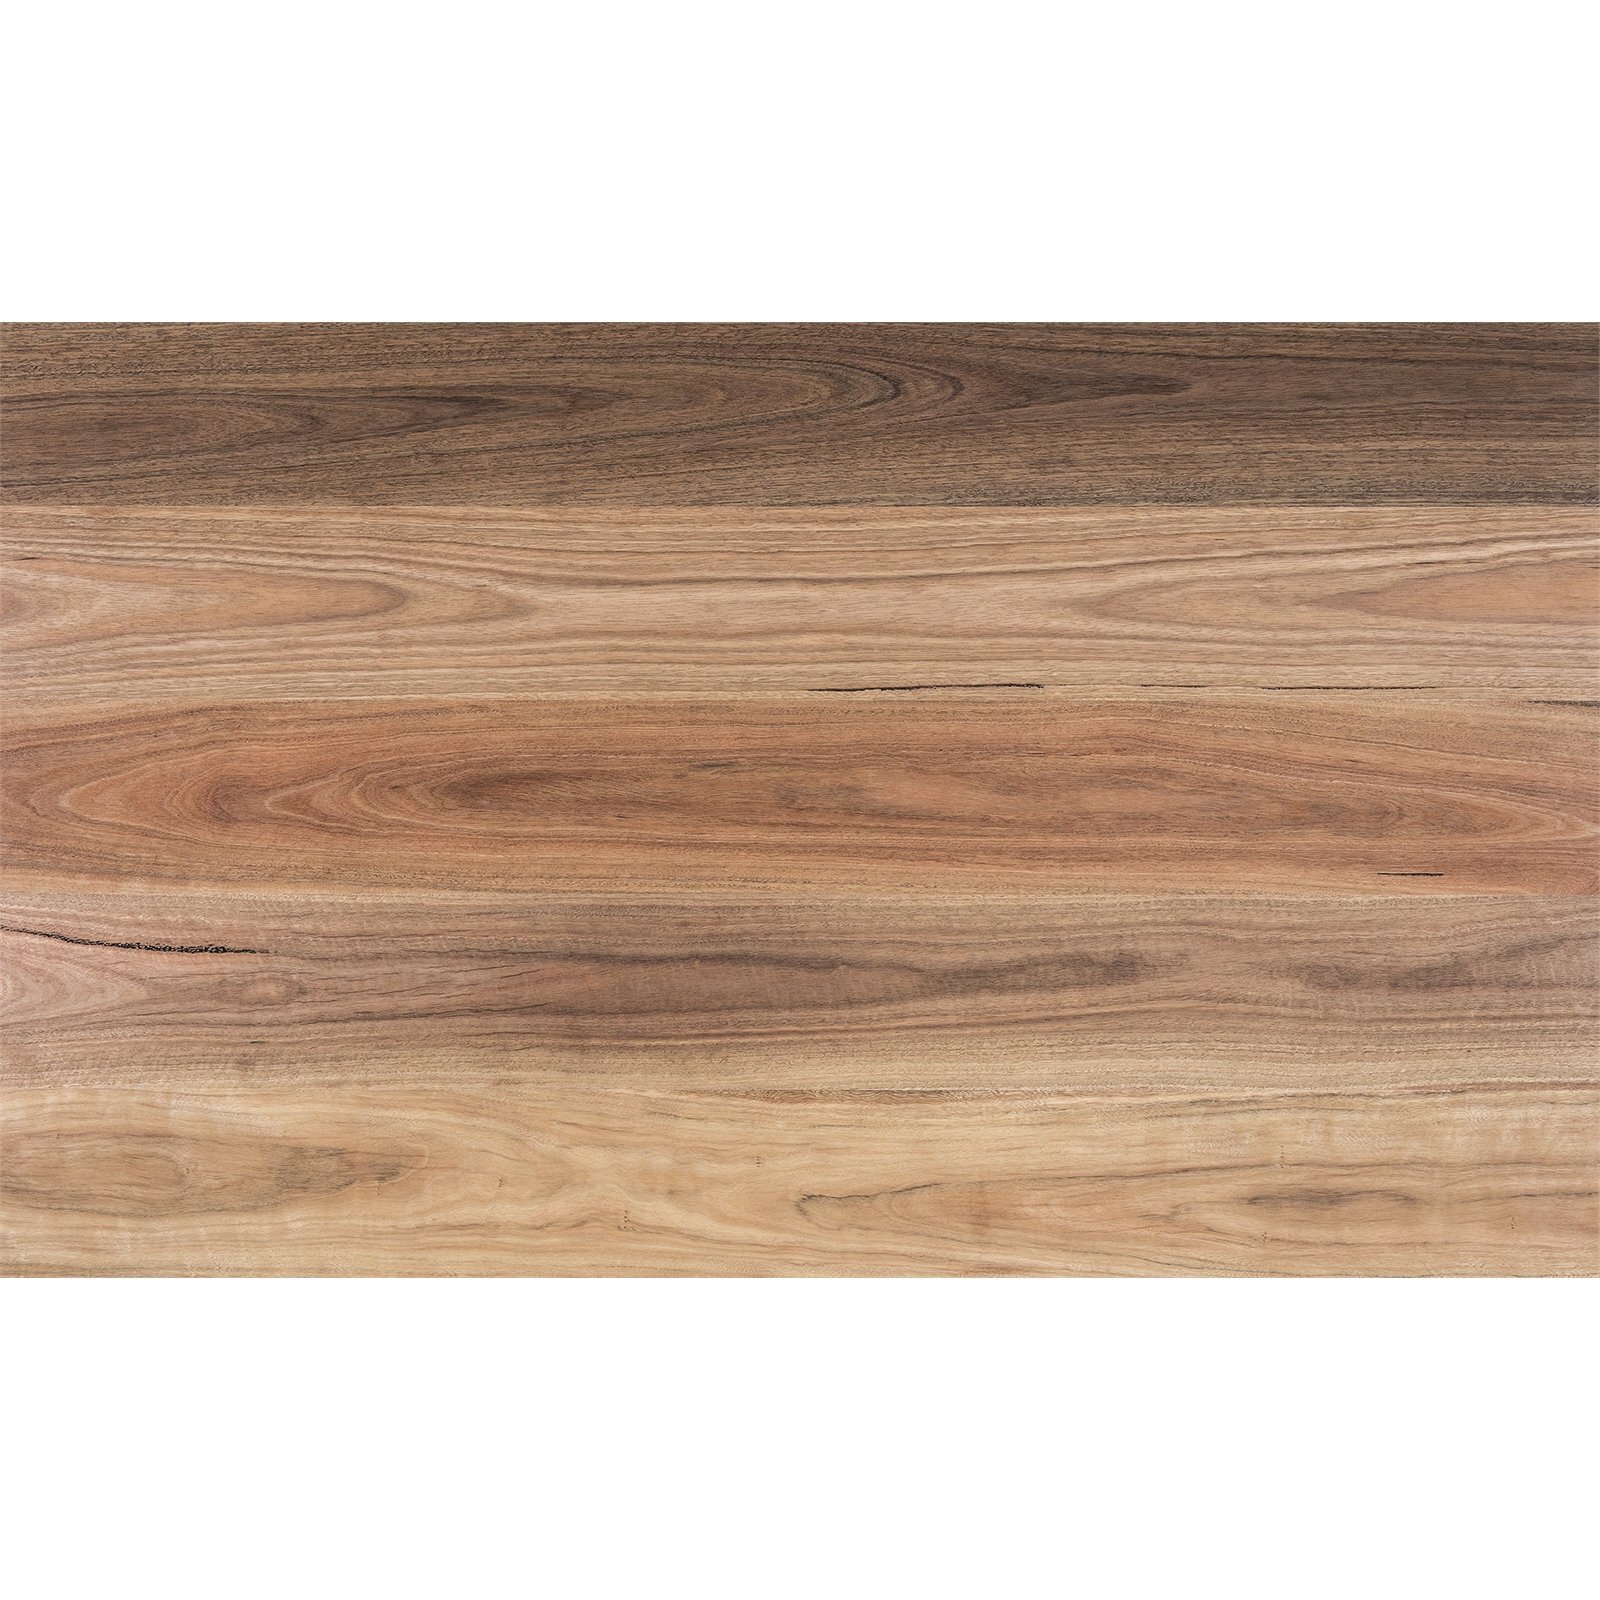 186mm Flooring Spotted Gum 2.455SQM Pack